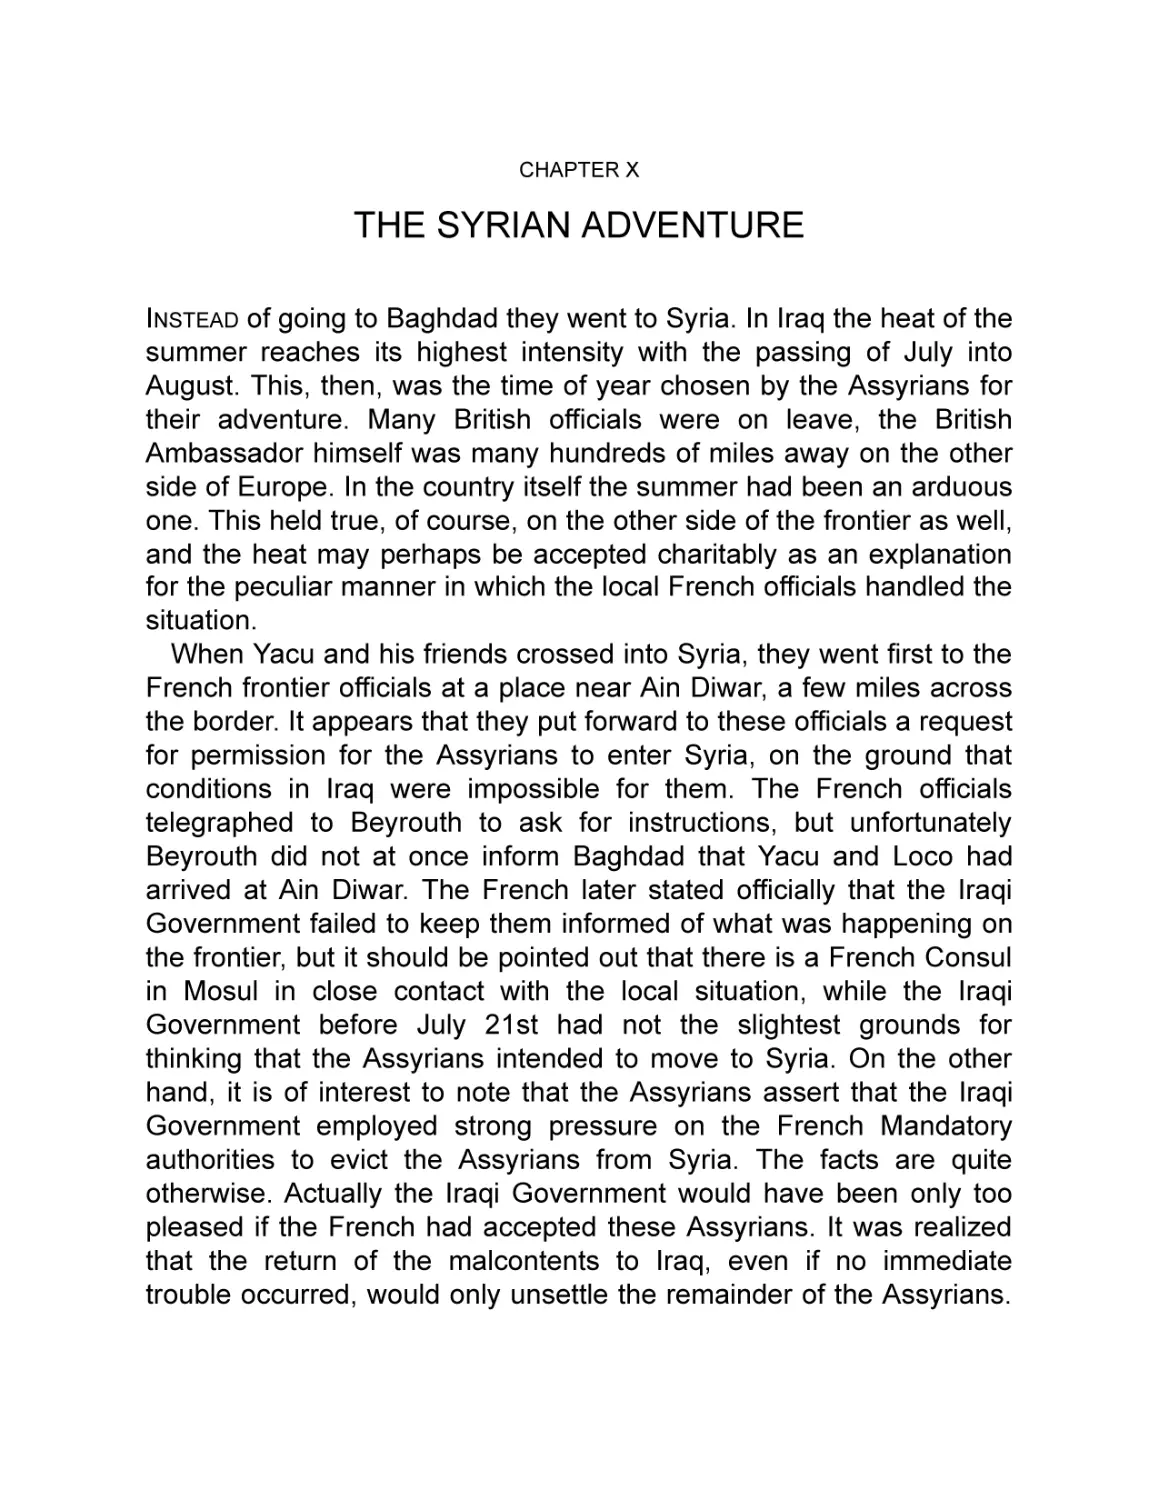 X The Syrian Adventure